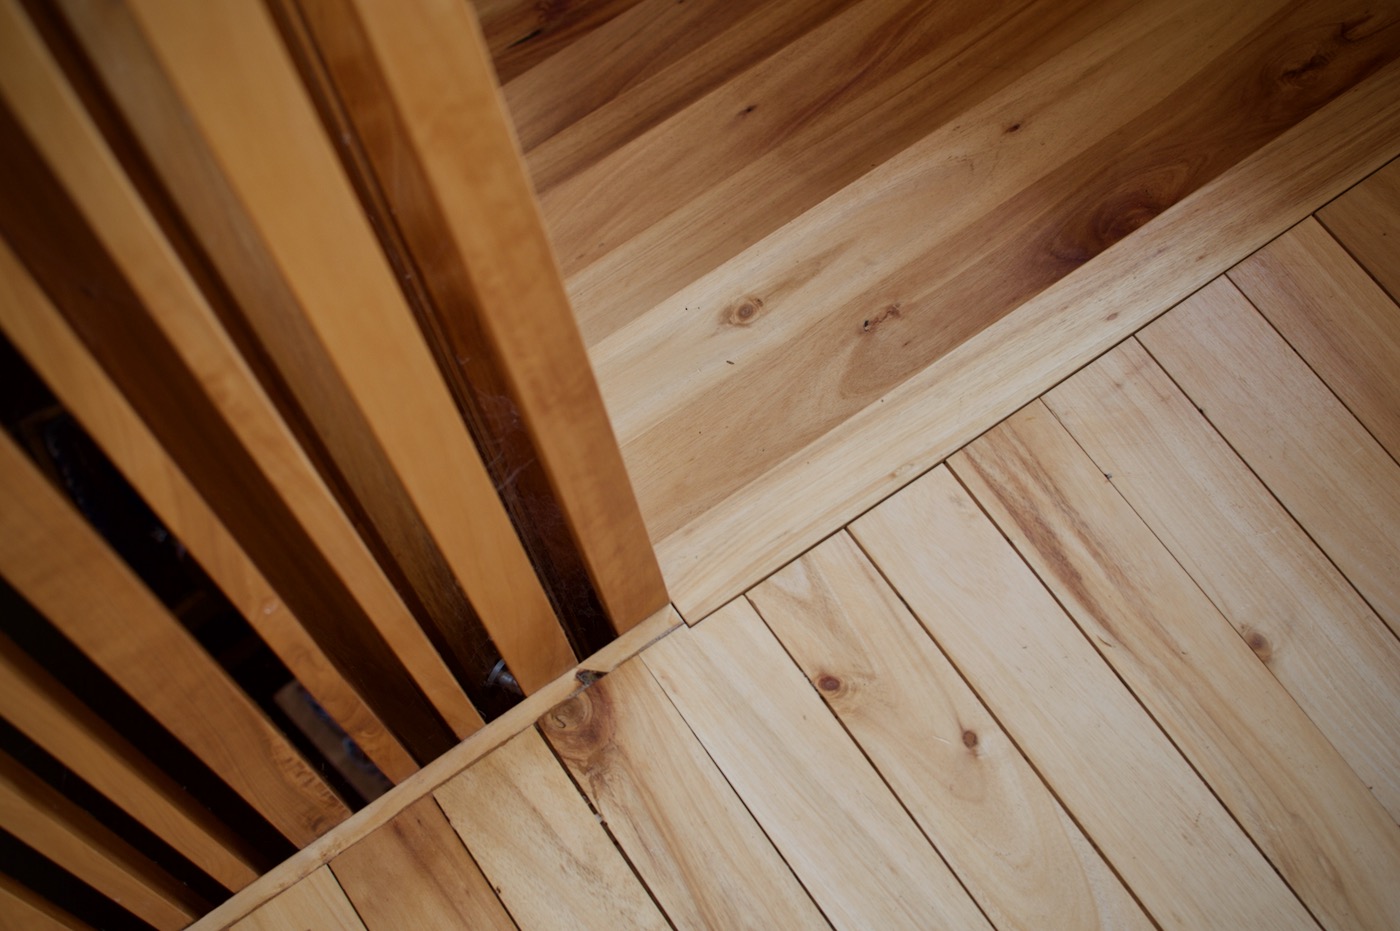 Silver wattle flooring and stairs